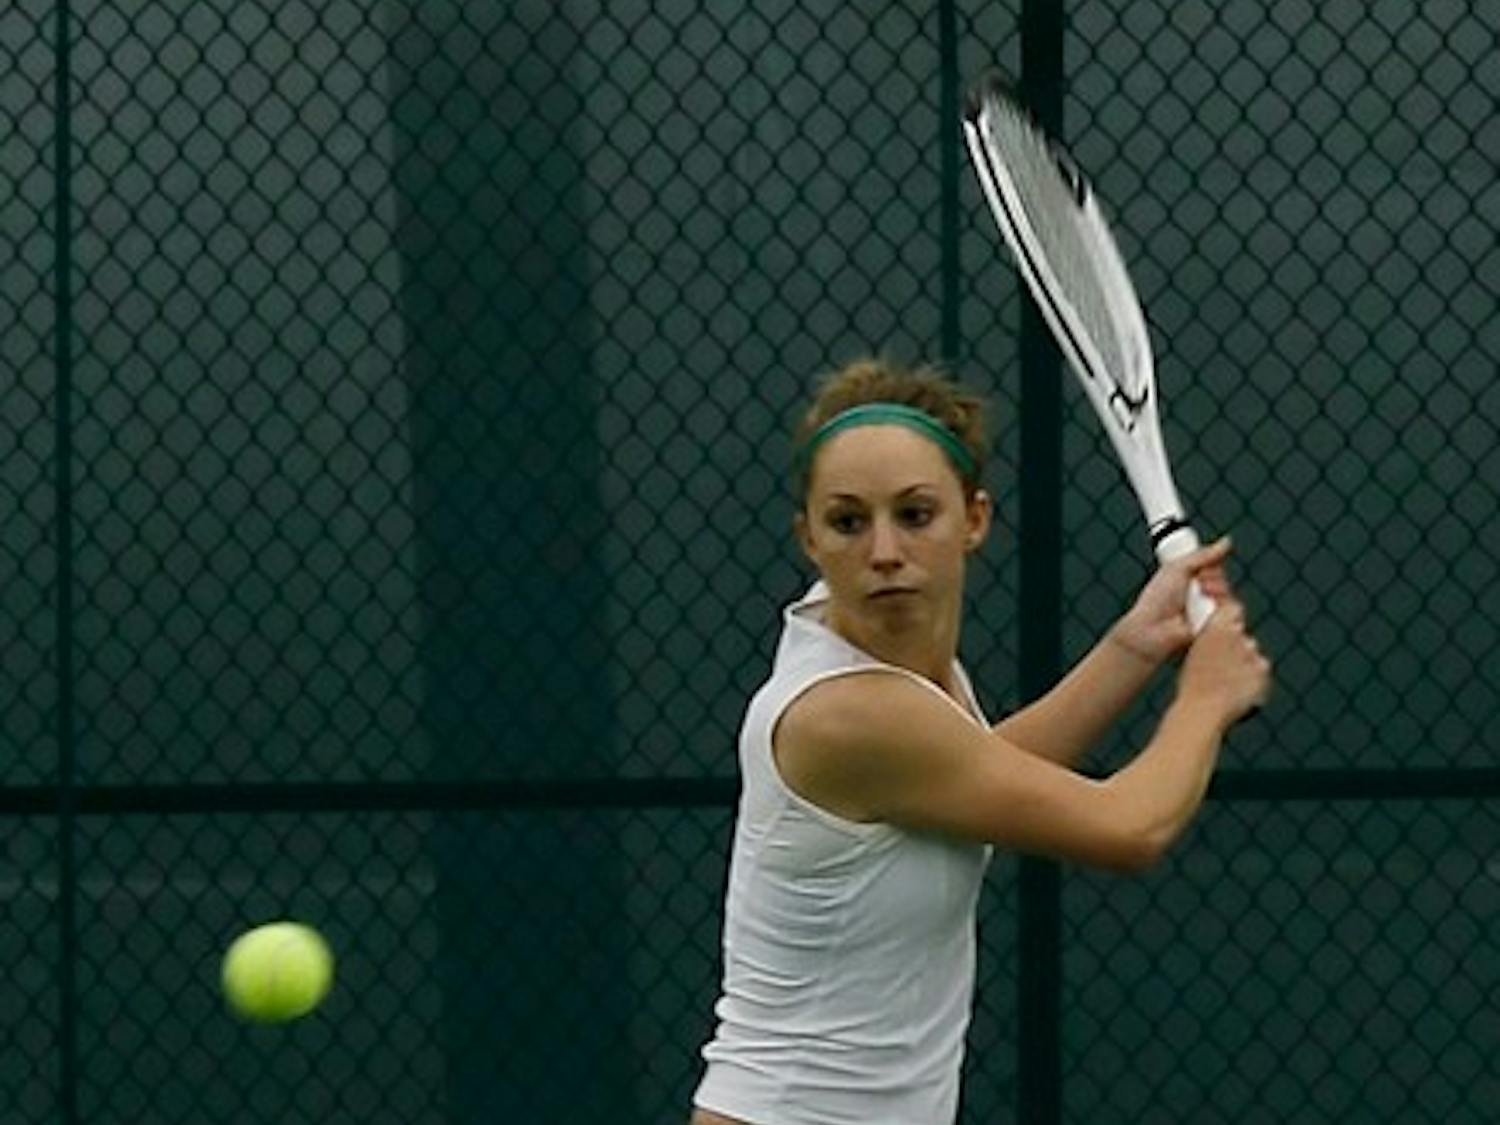 The Big Green women's tennis team narrowly fell to Brown on Sunday, 4-3, despite winning the majority of the single matches.